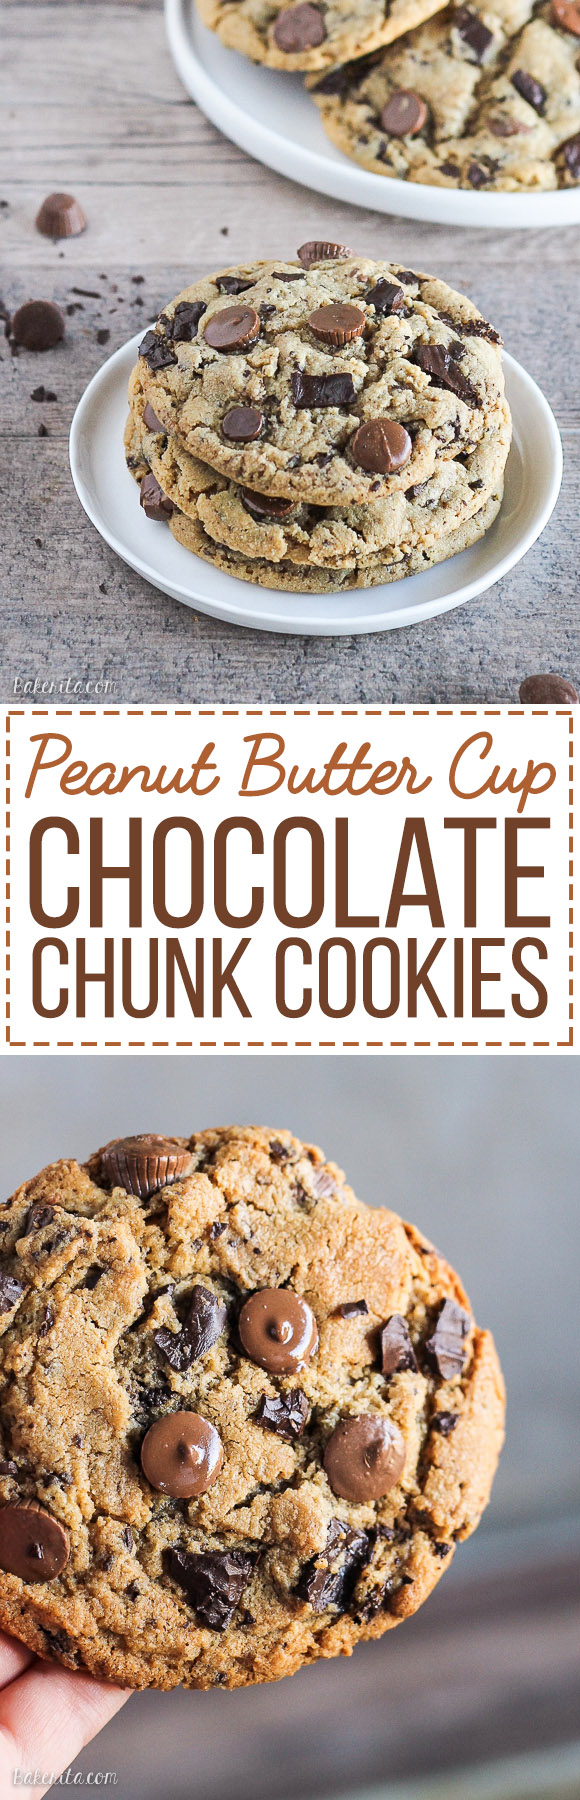 These Giant Peanut Butter Cup Chocolate Chunk Cookies are big, chewy, and full of peanut butter, peanut butter cups, and rich melted chocolate! If you love chocolate and peanut butter, these cookies will become a quick favorite.